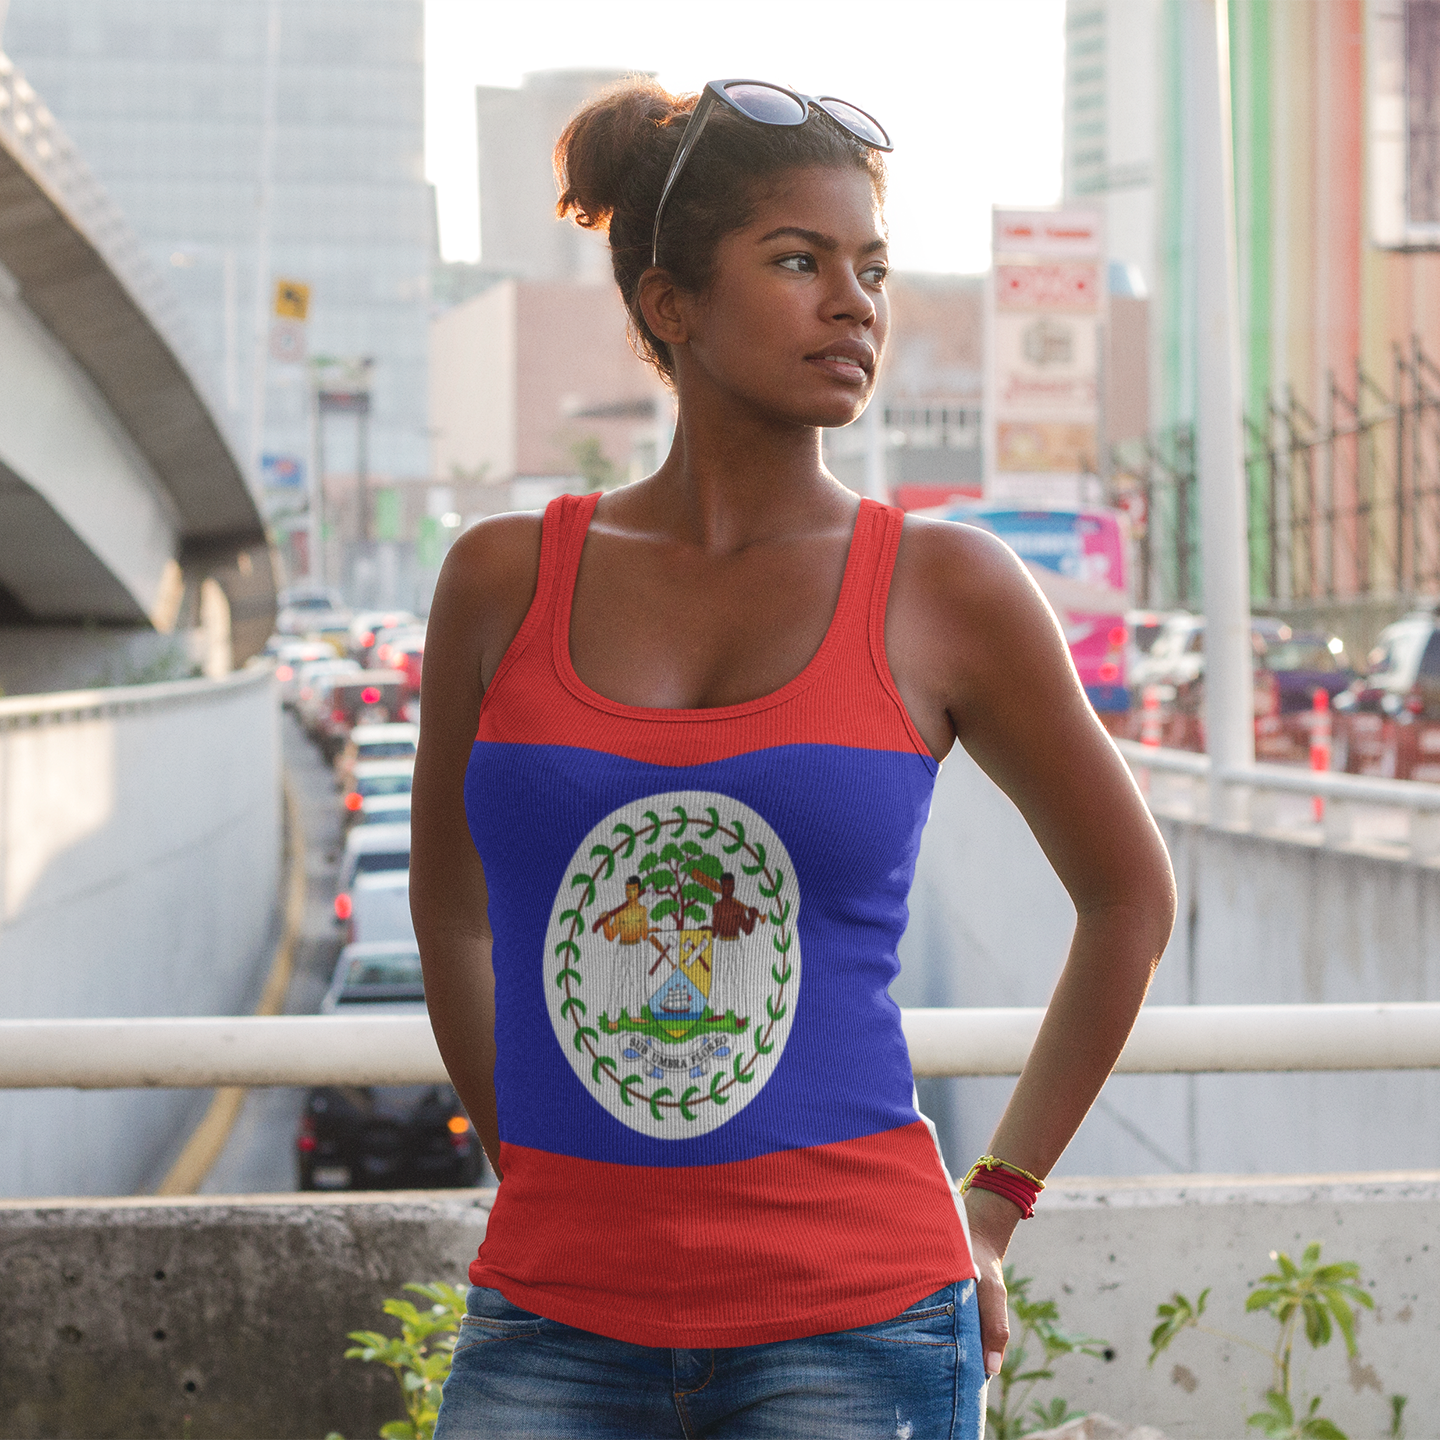 Belize Flag - Women's Fitted Tank Top